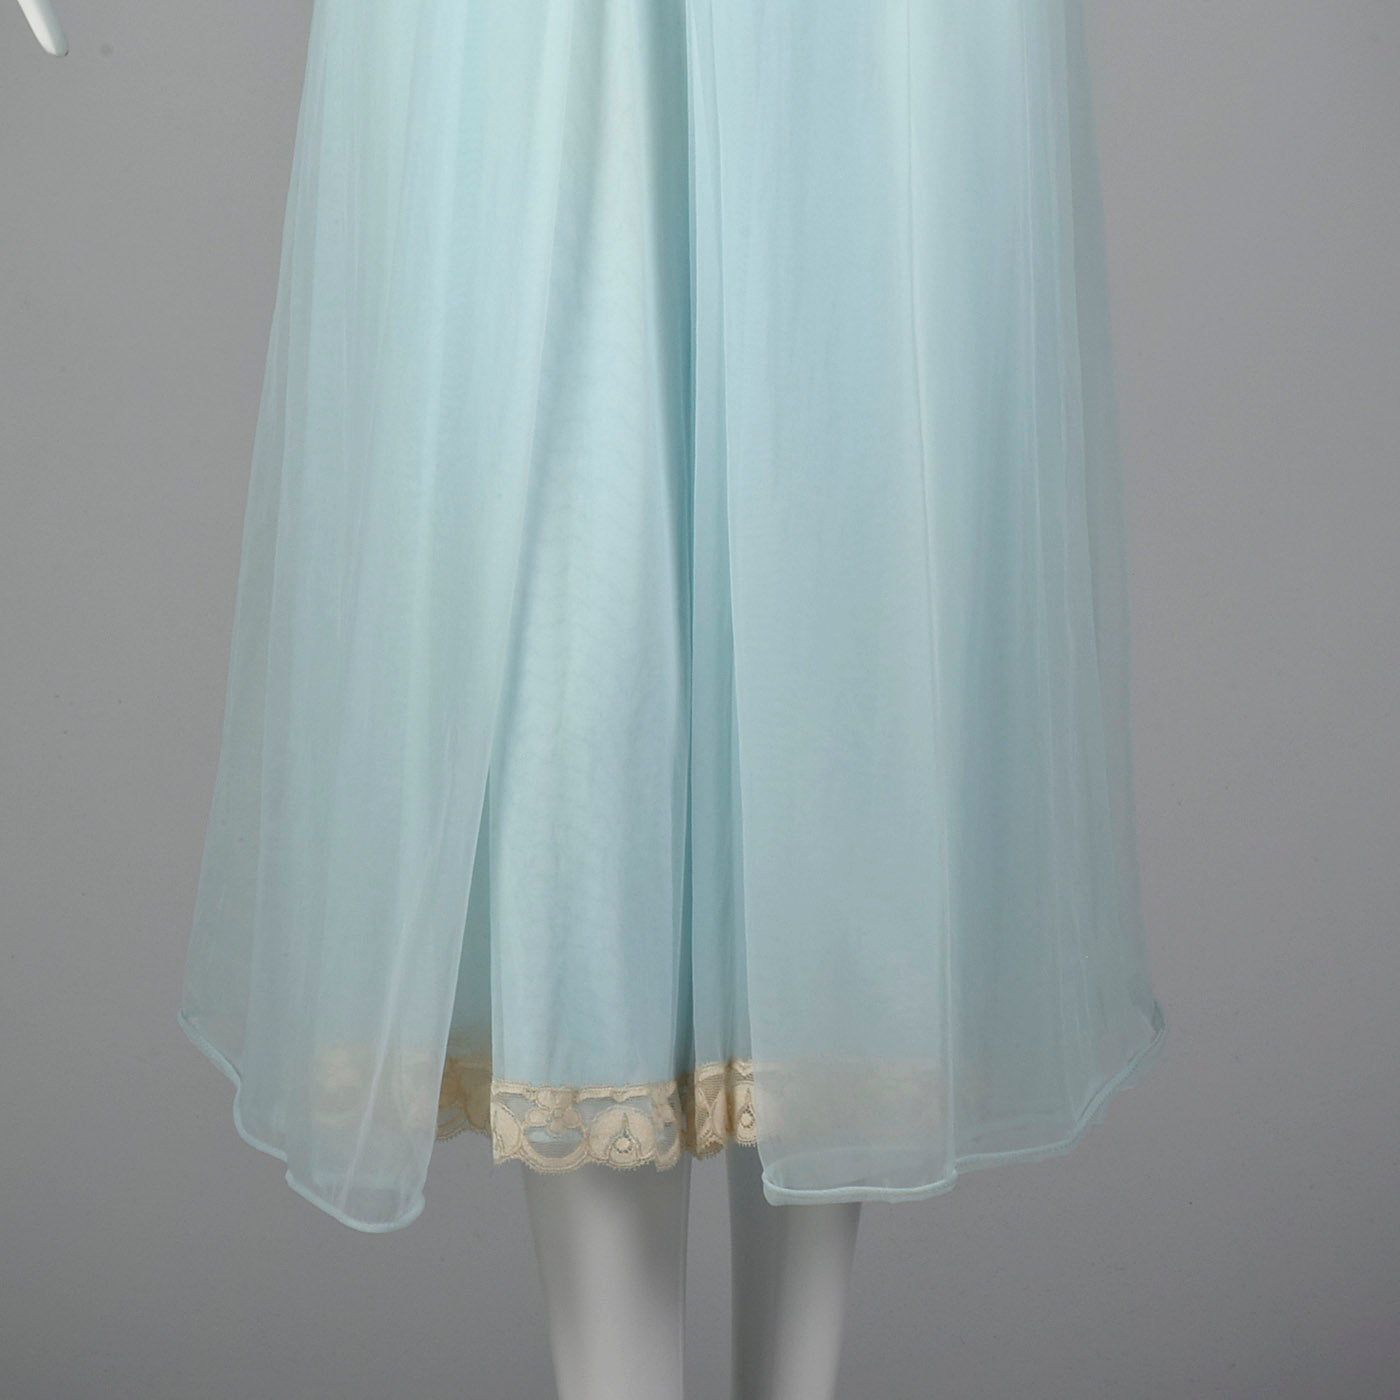 1950s Blue Nightgown and Peignoir Set